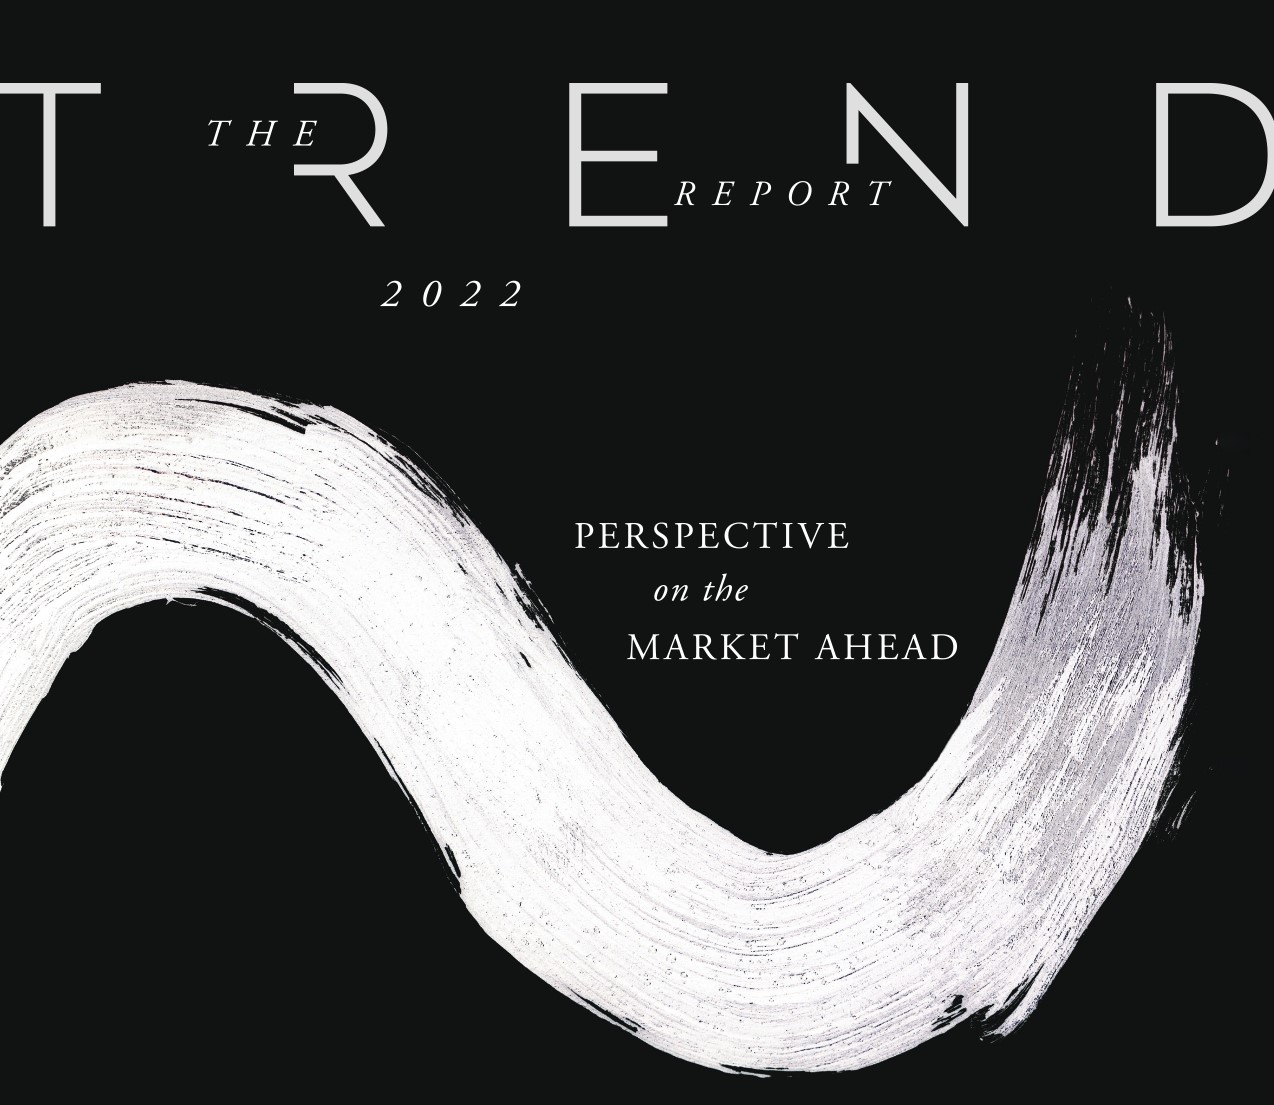 the trend report